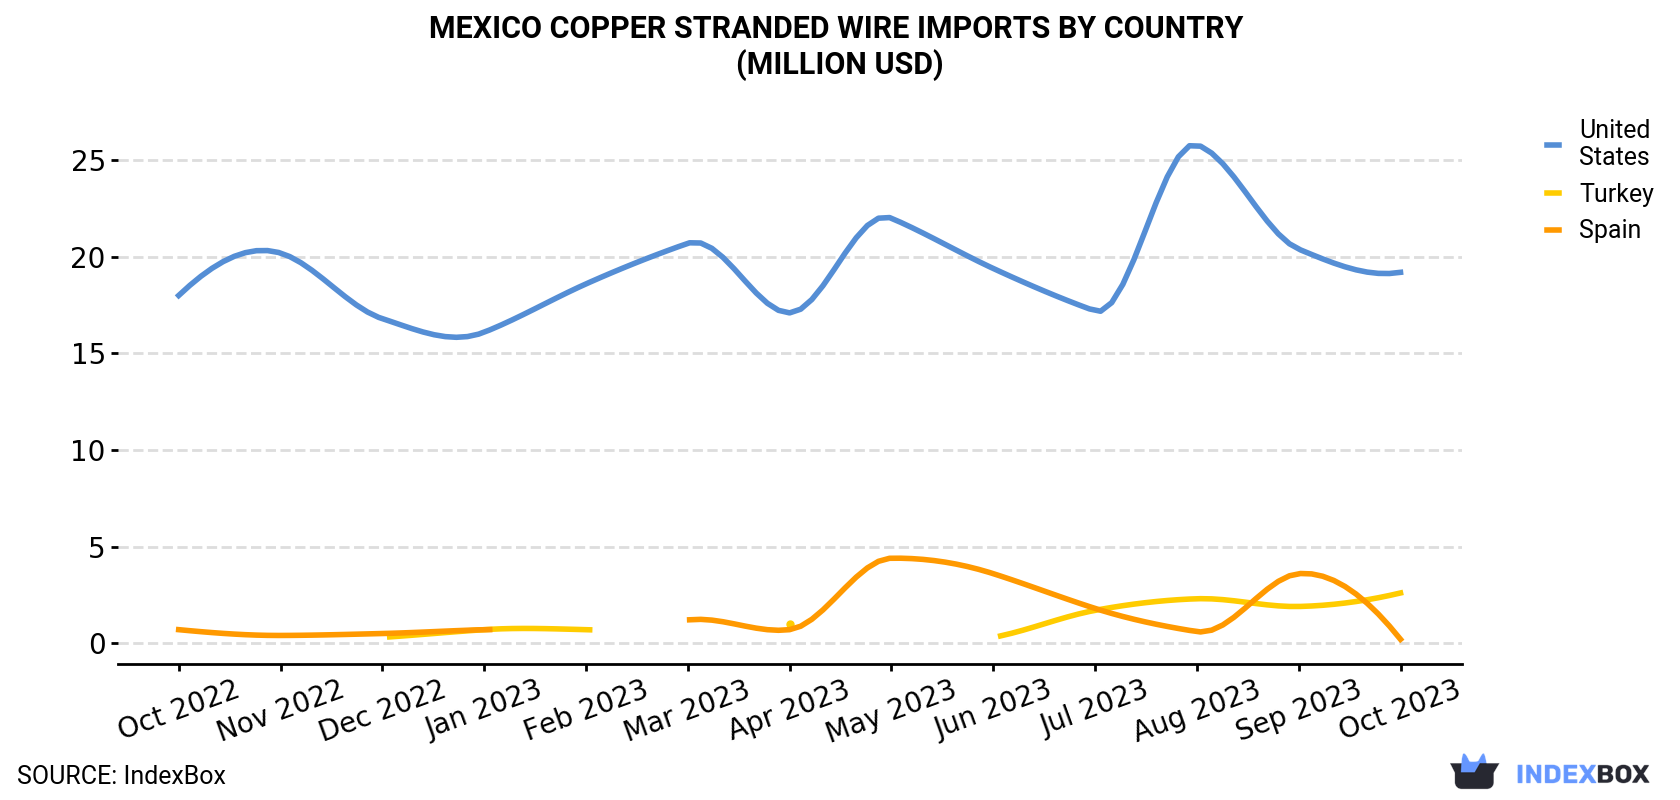 Mexico Copper Stranded Wire Imports By Country (Million USD)